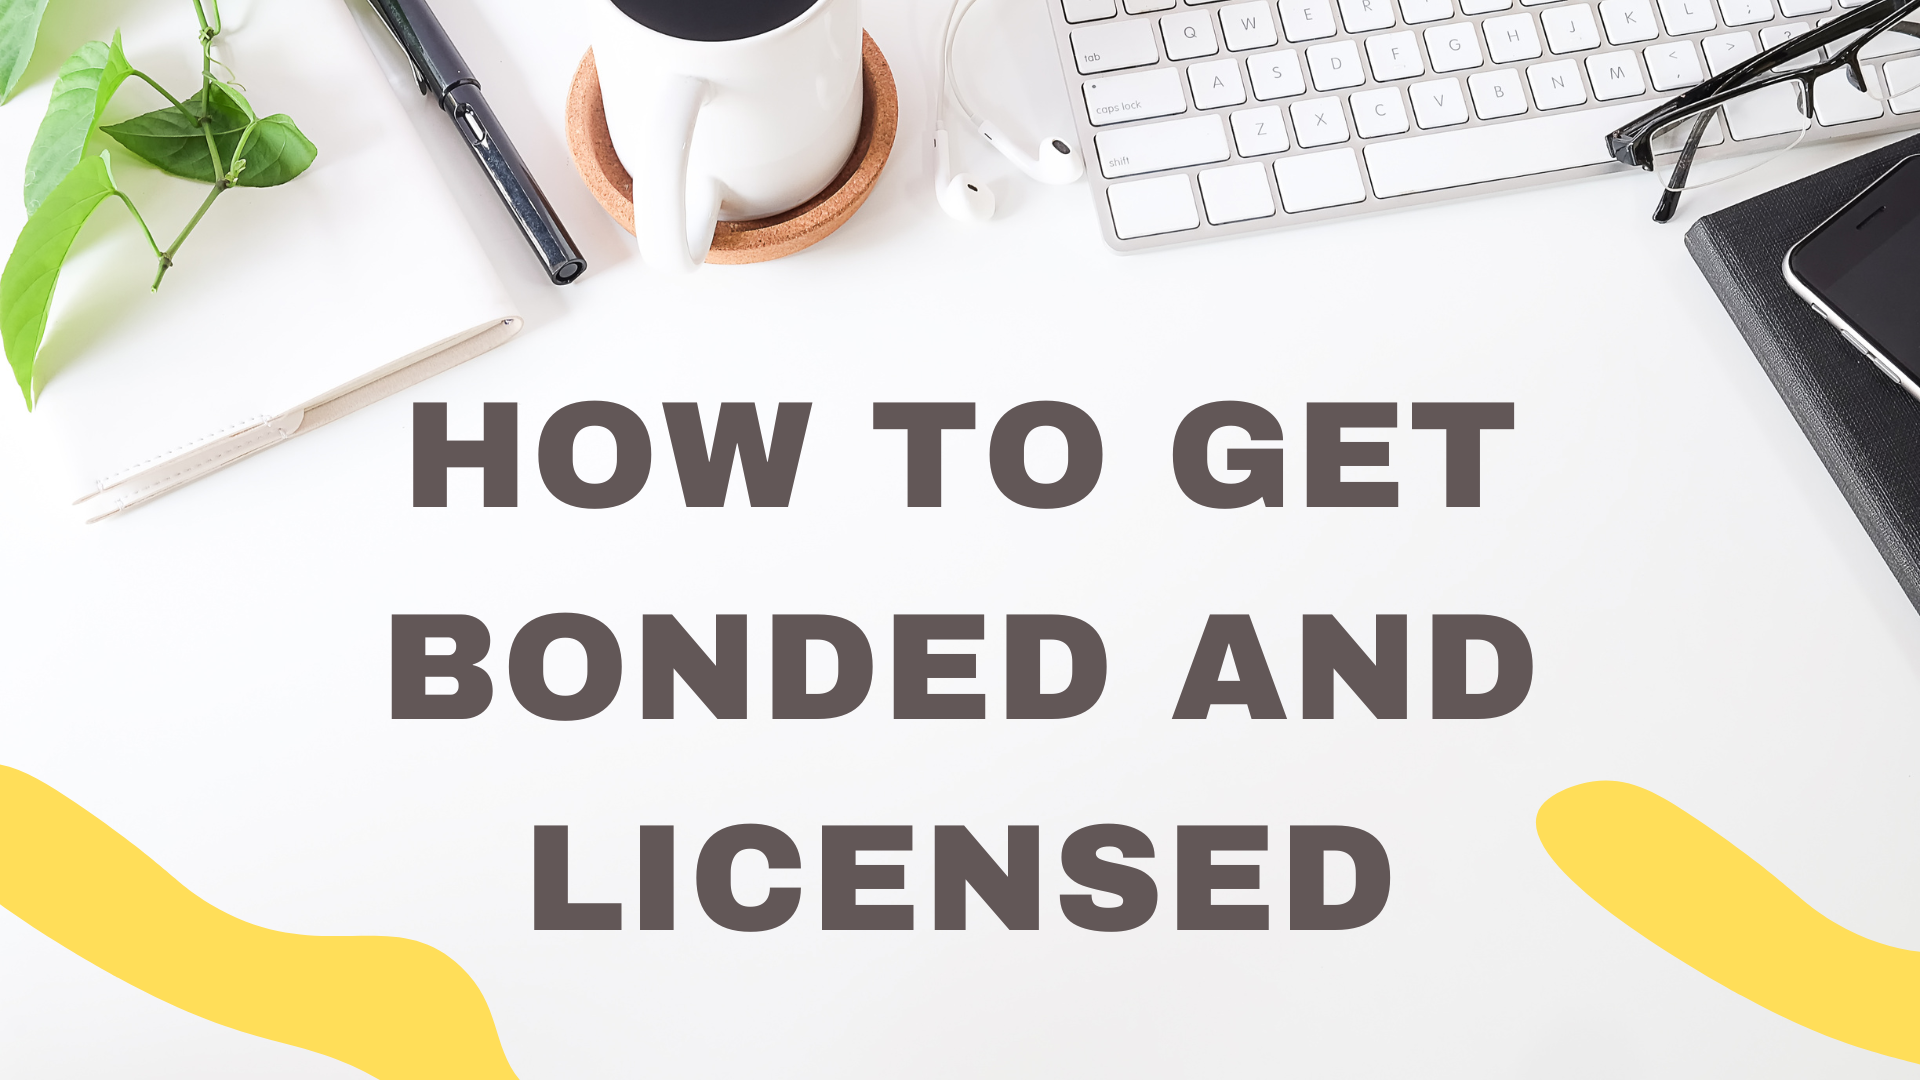 How To Get Bonded And Licensed